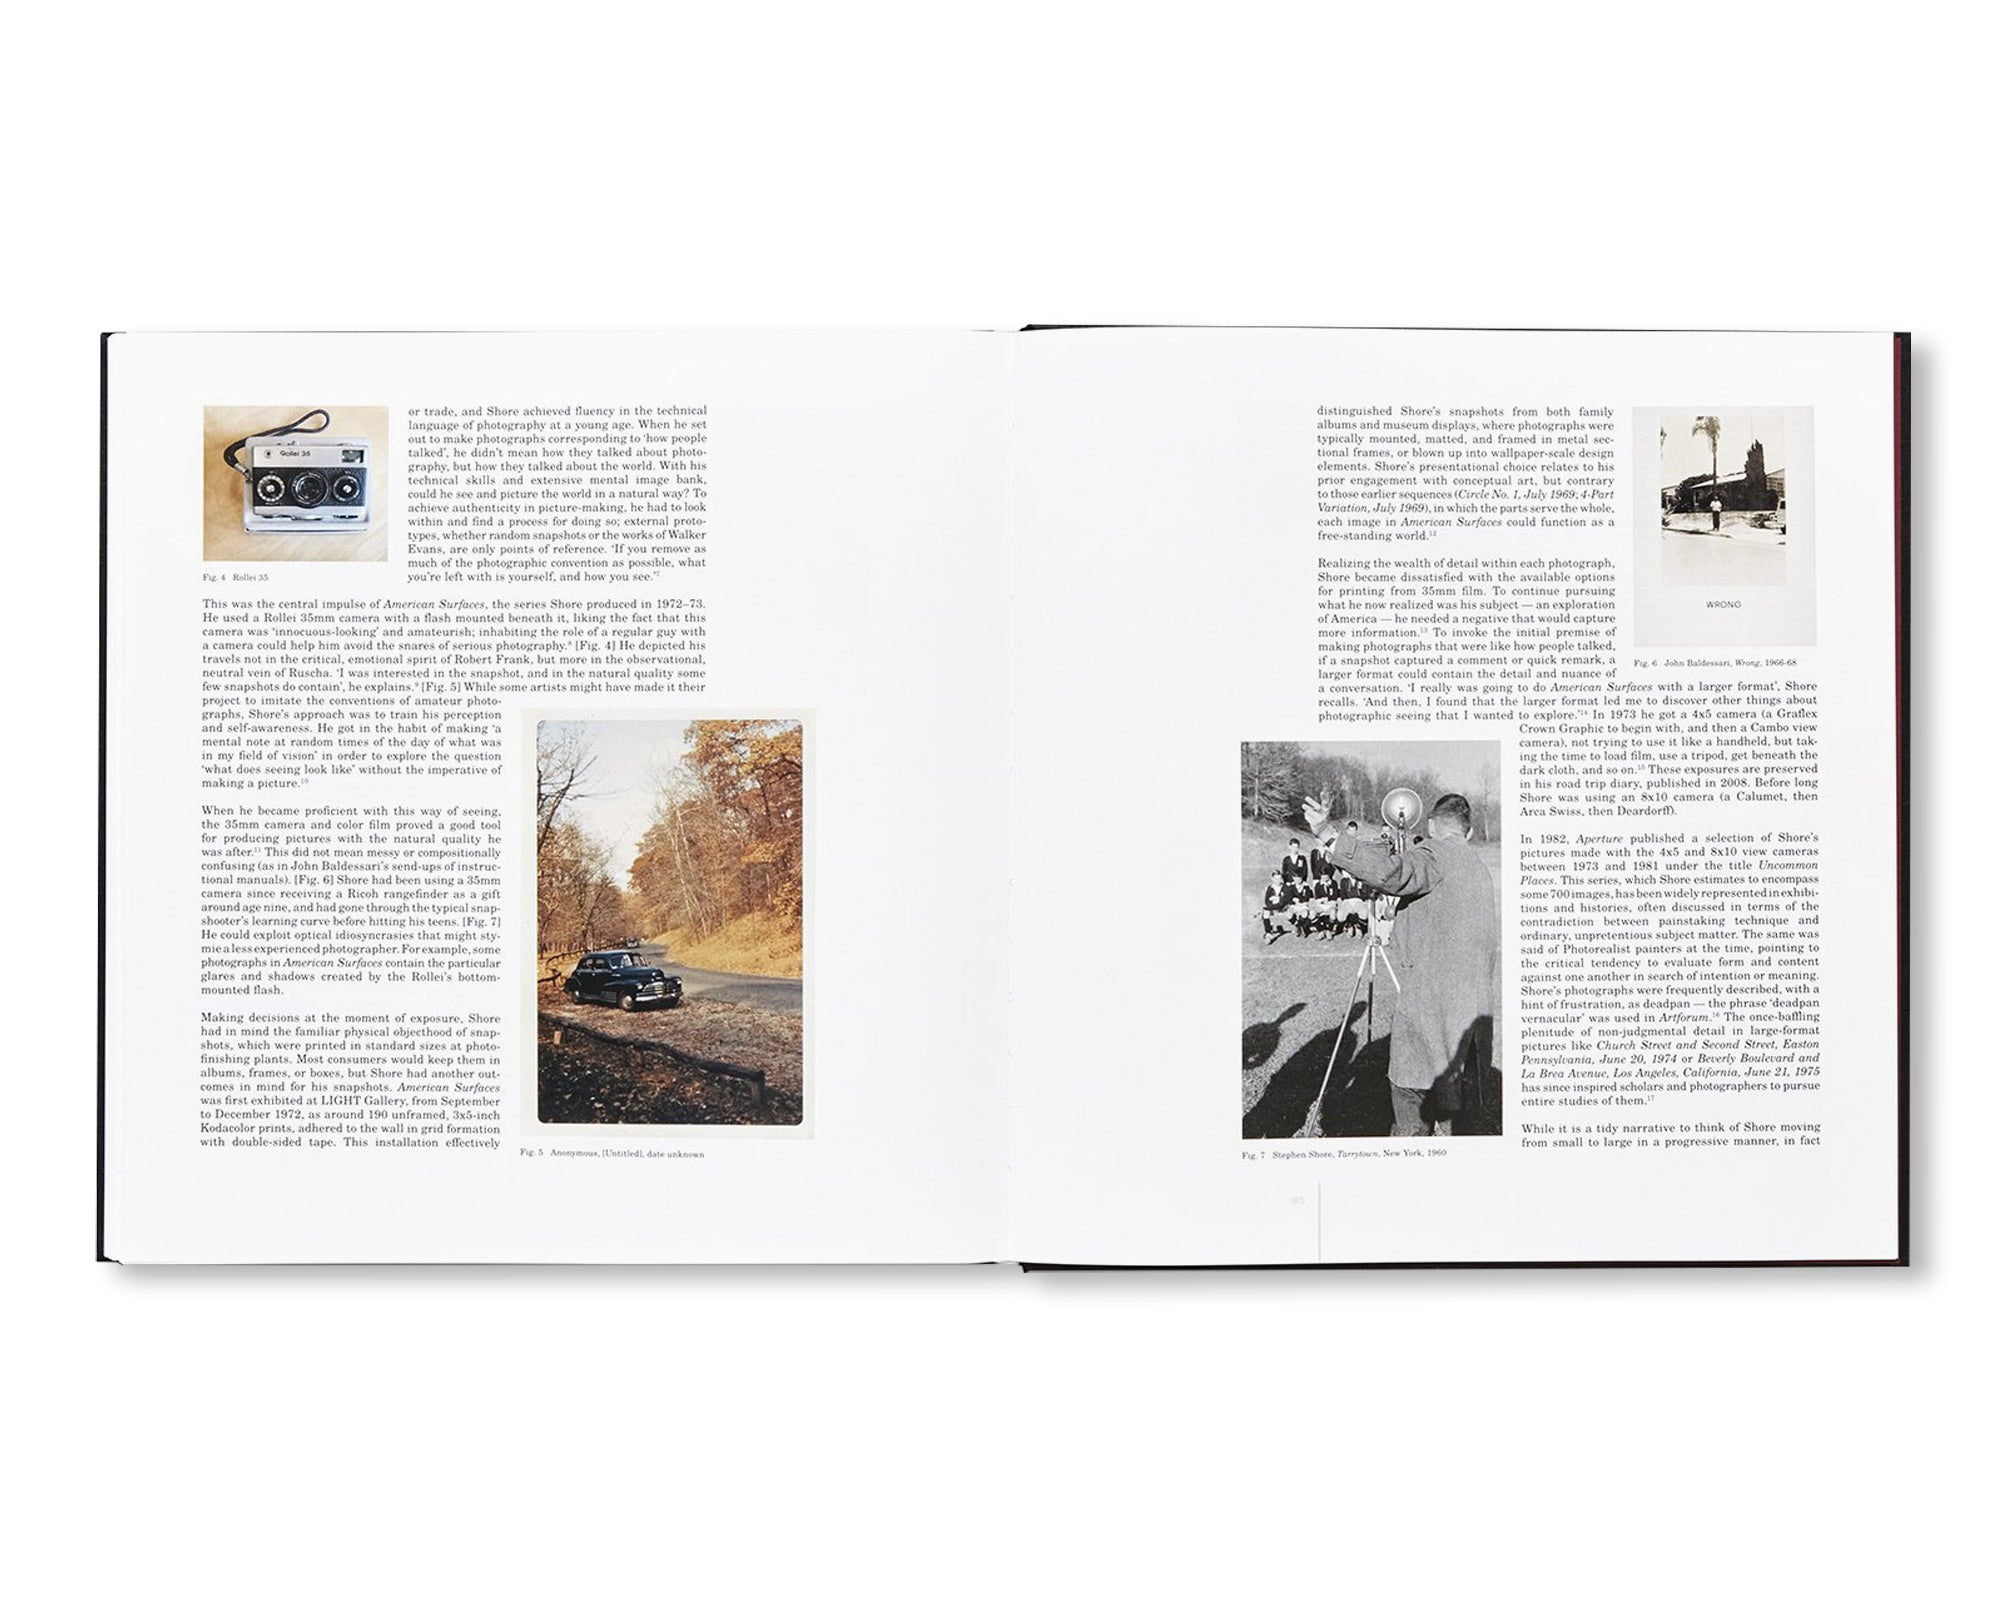 TRANSPARENCIES: SMALL CAMERA WORKS 1971-1979 by Stephen Shore